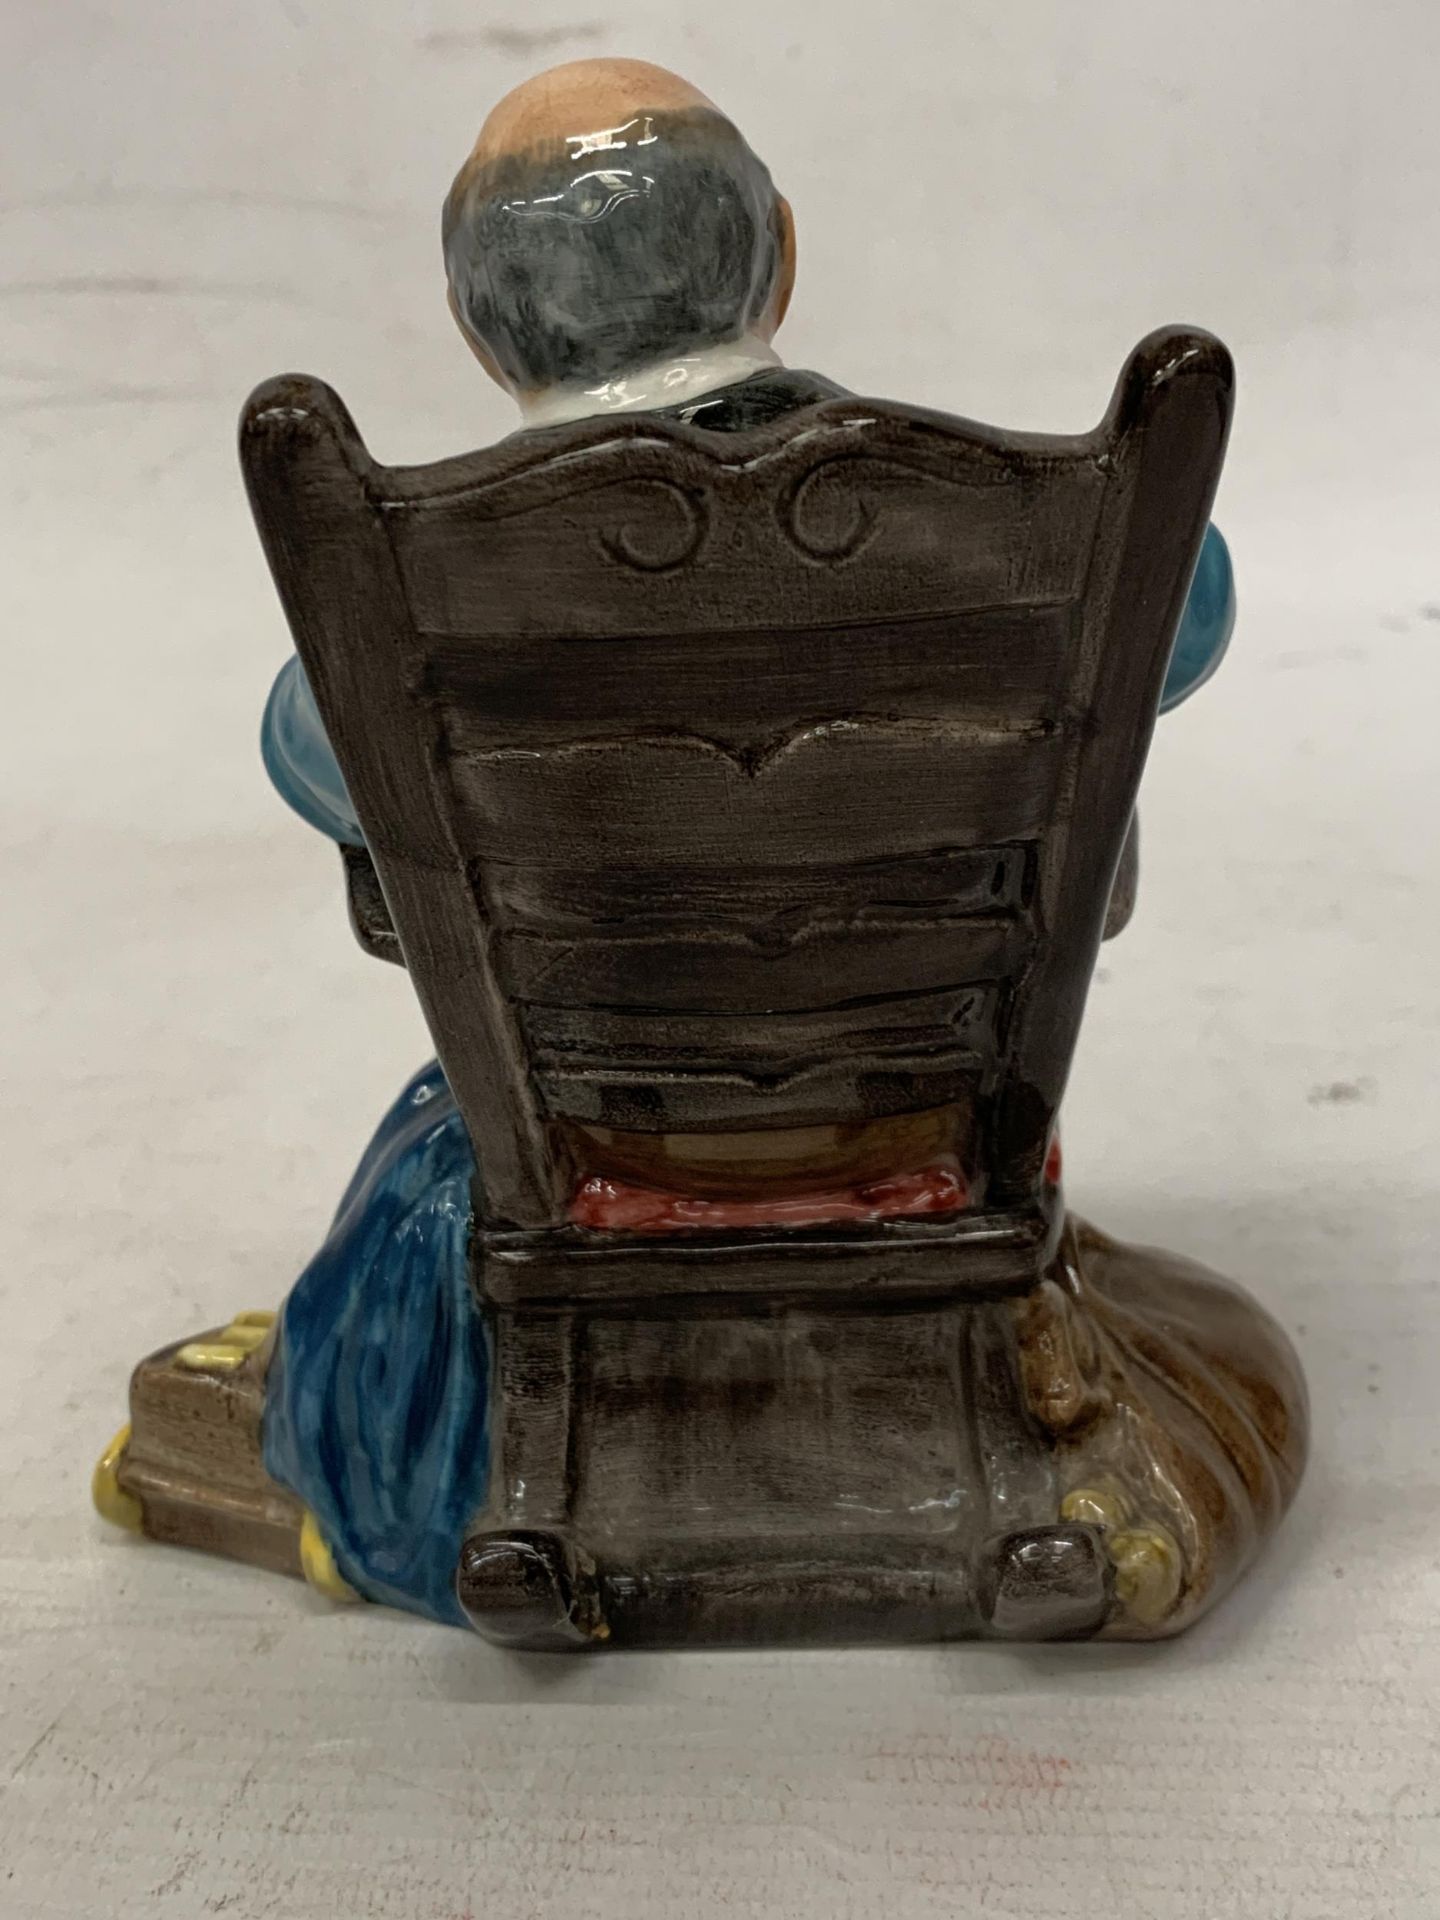 A ROYAL DOULTON FIGURE "THE TOYMAKER" HN 2250 - Image 3 of 5